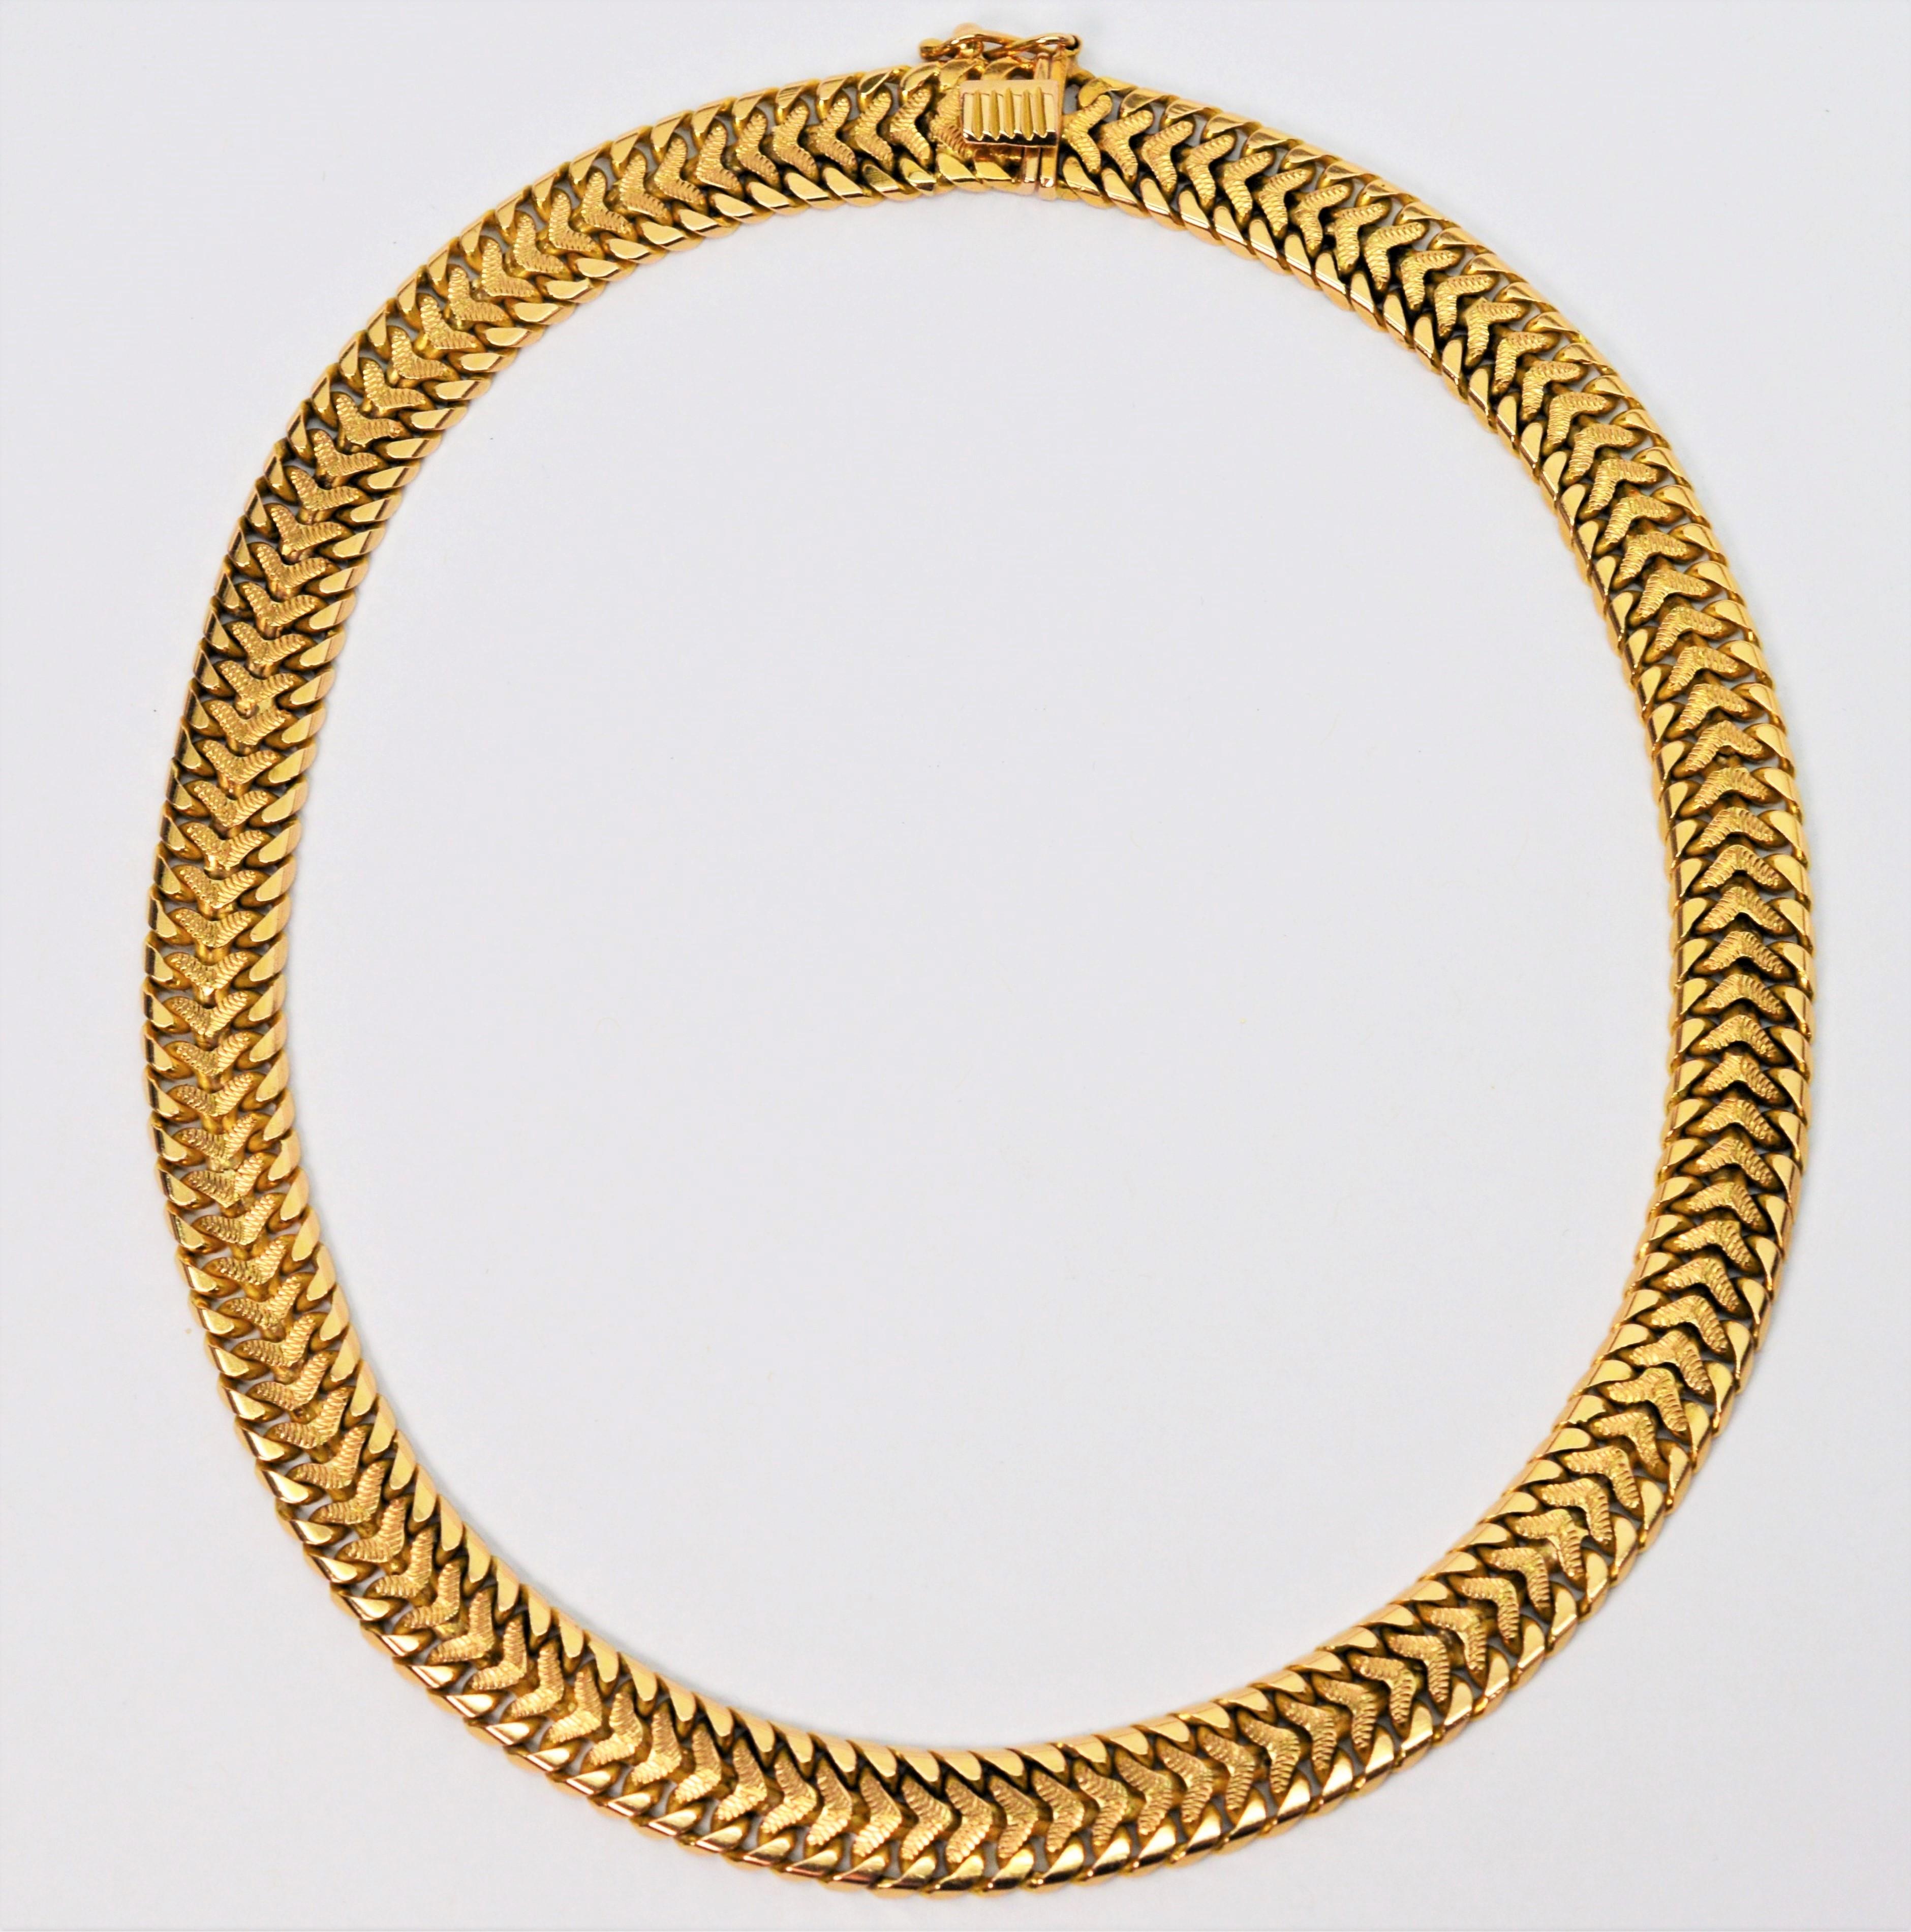 Keep it stylishly close to the neck with this striking fancy Bismark chain necklace in bright eighteen karat yellow gold. The intricate patterned weave has an interesting textured gold inner link framed by a bright outer link. This necklace makes a